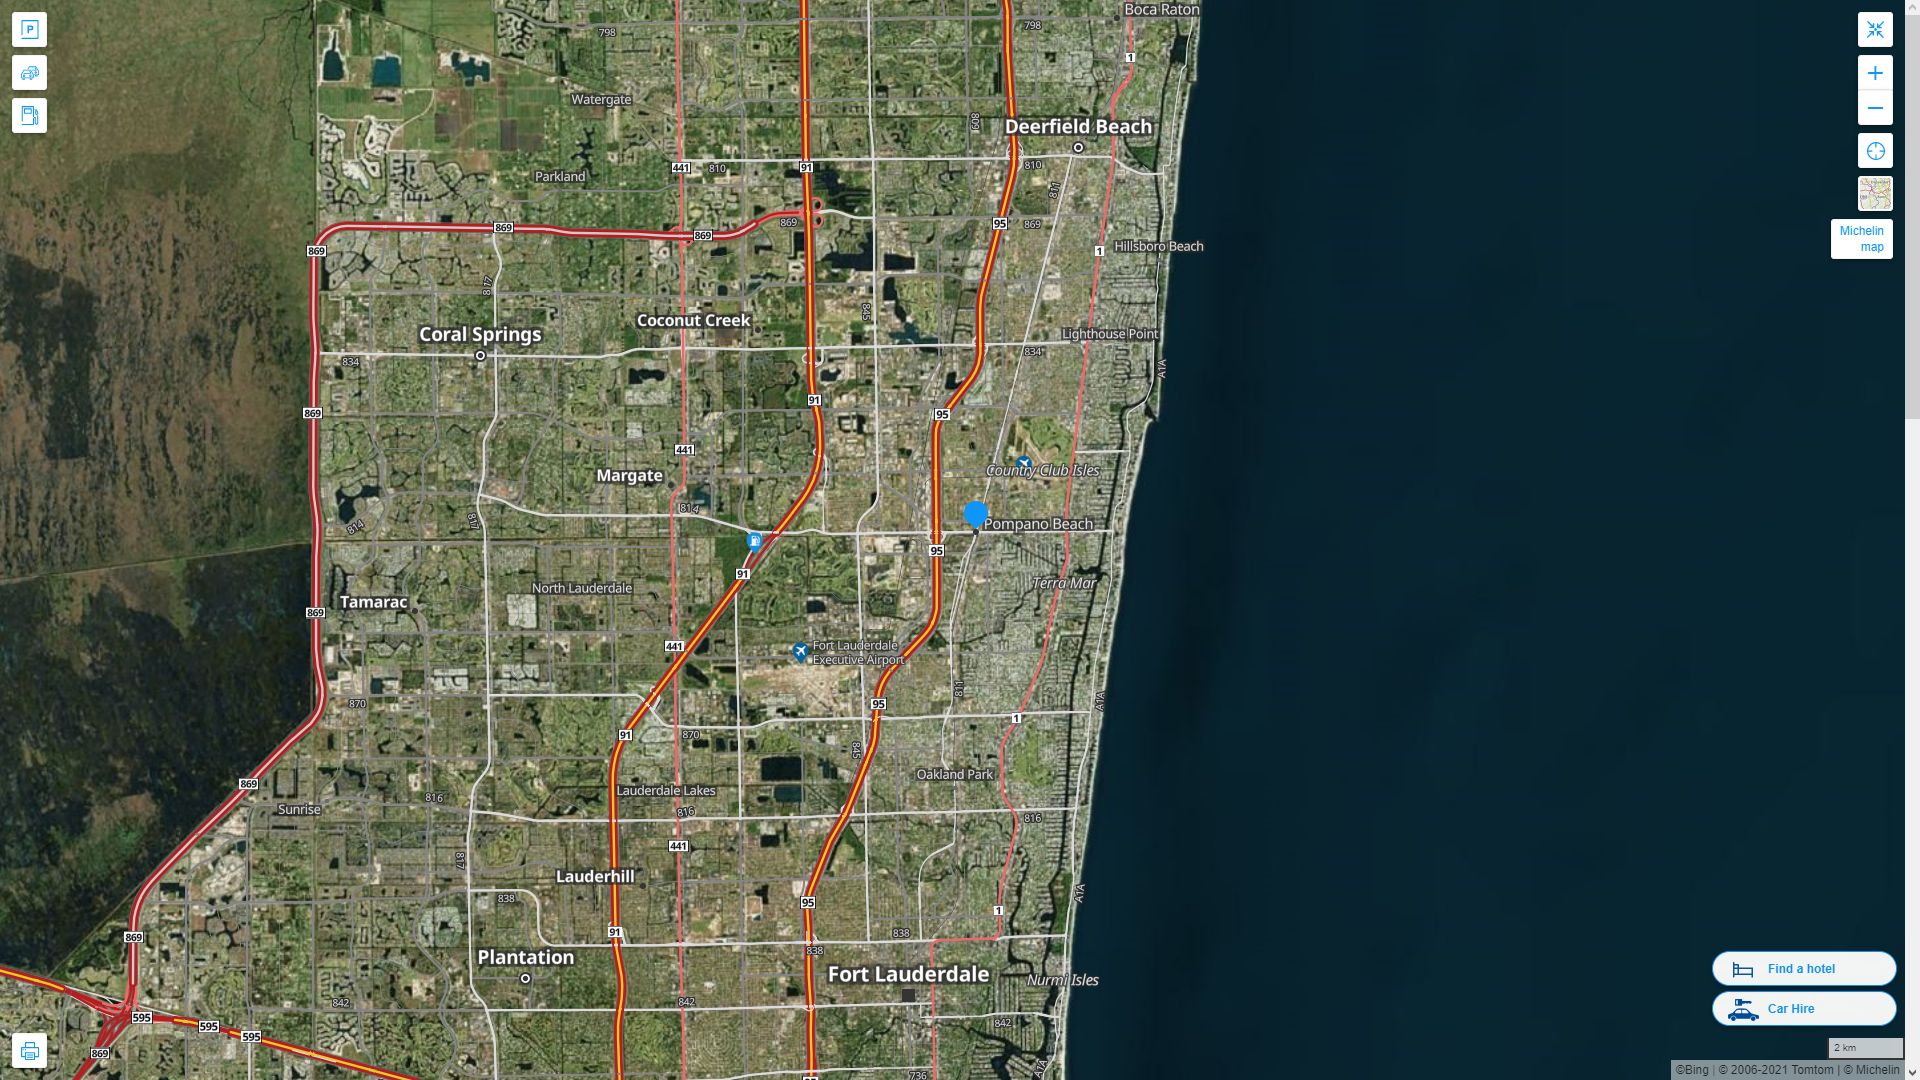 Pompano Beach Florida Highway and Road Map with Satellite View